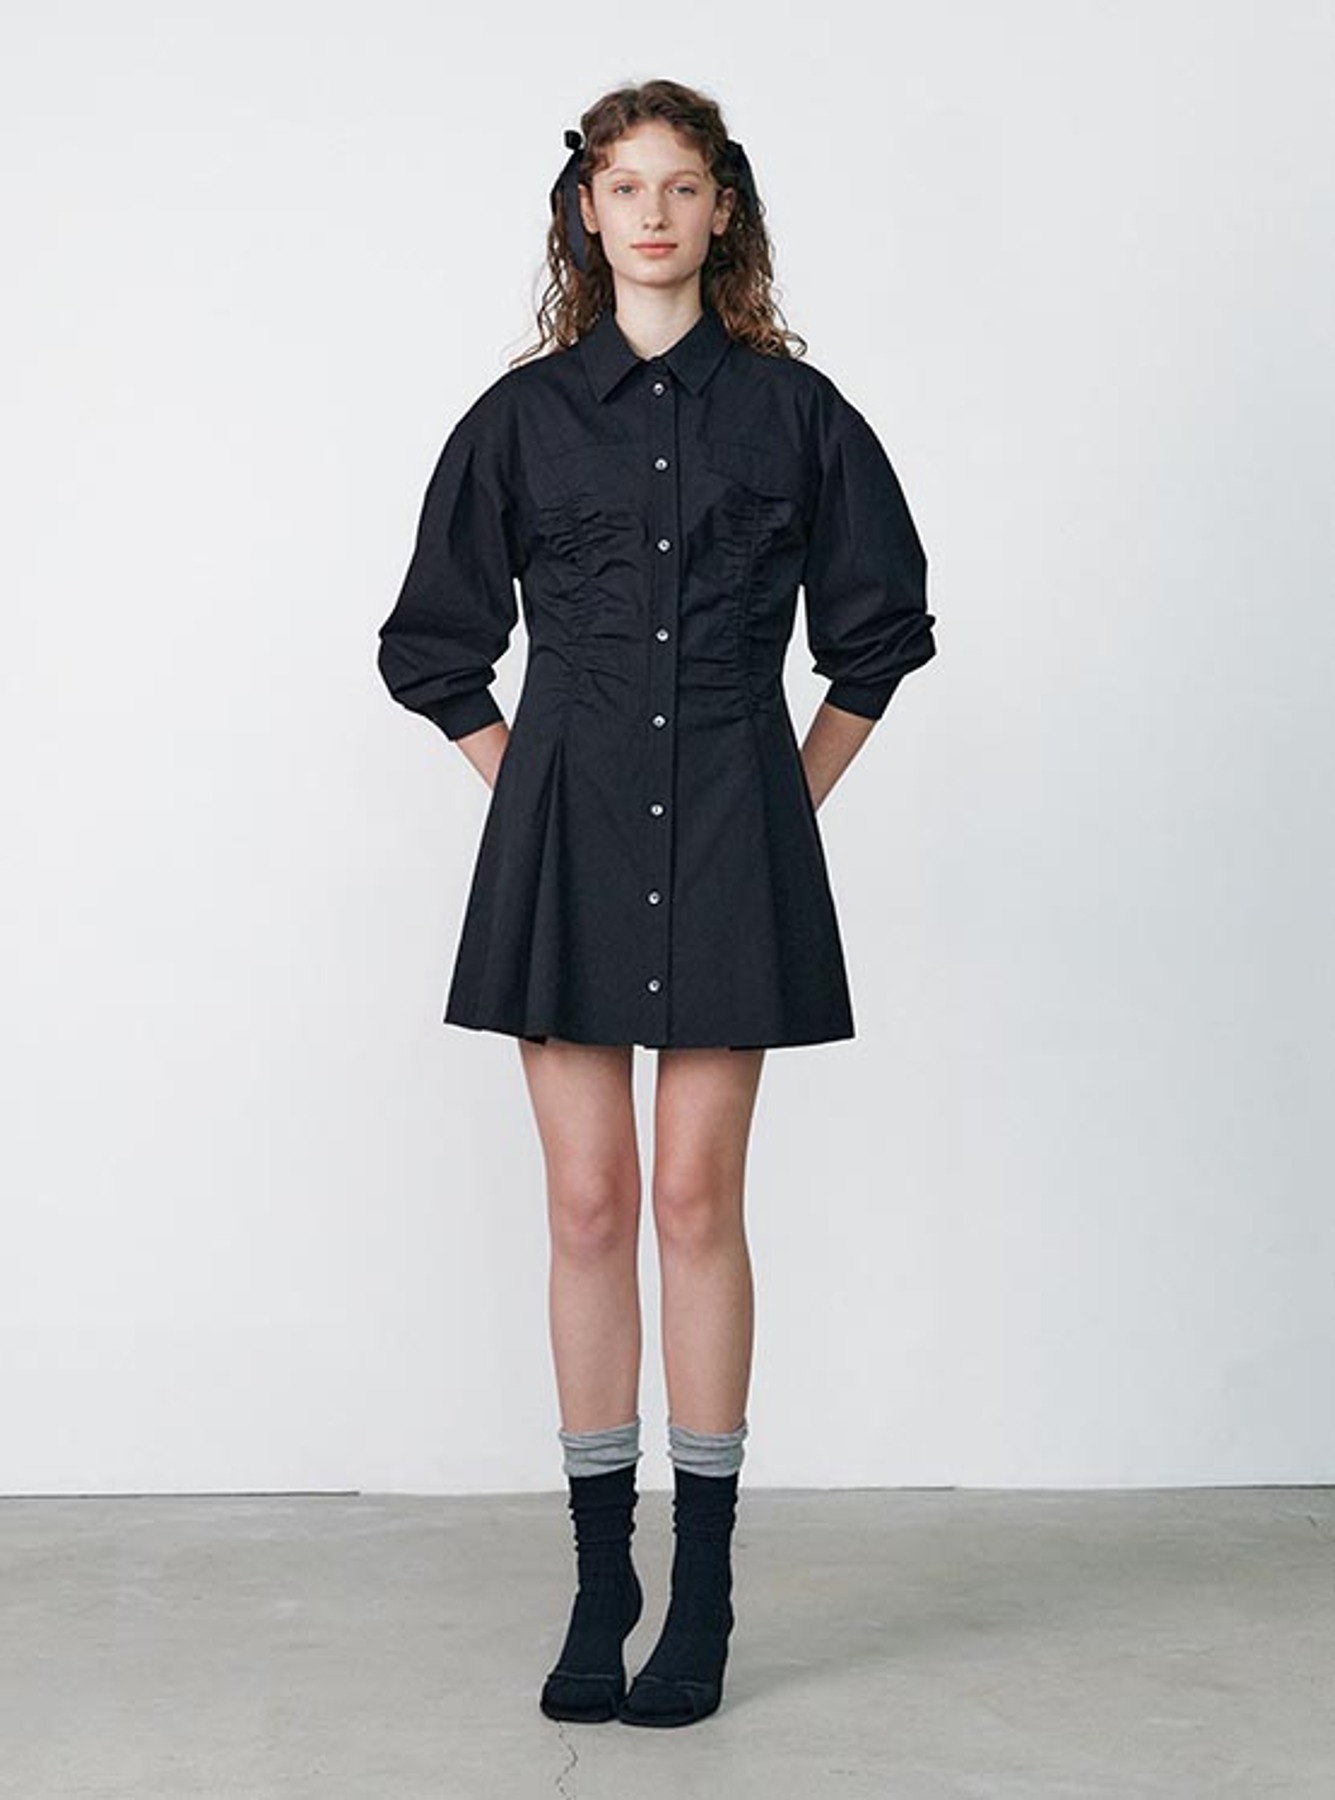 Shirring Shirts Onepiece in Black VW2AO470-10